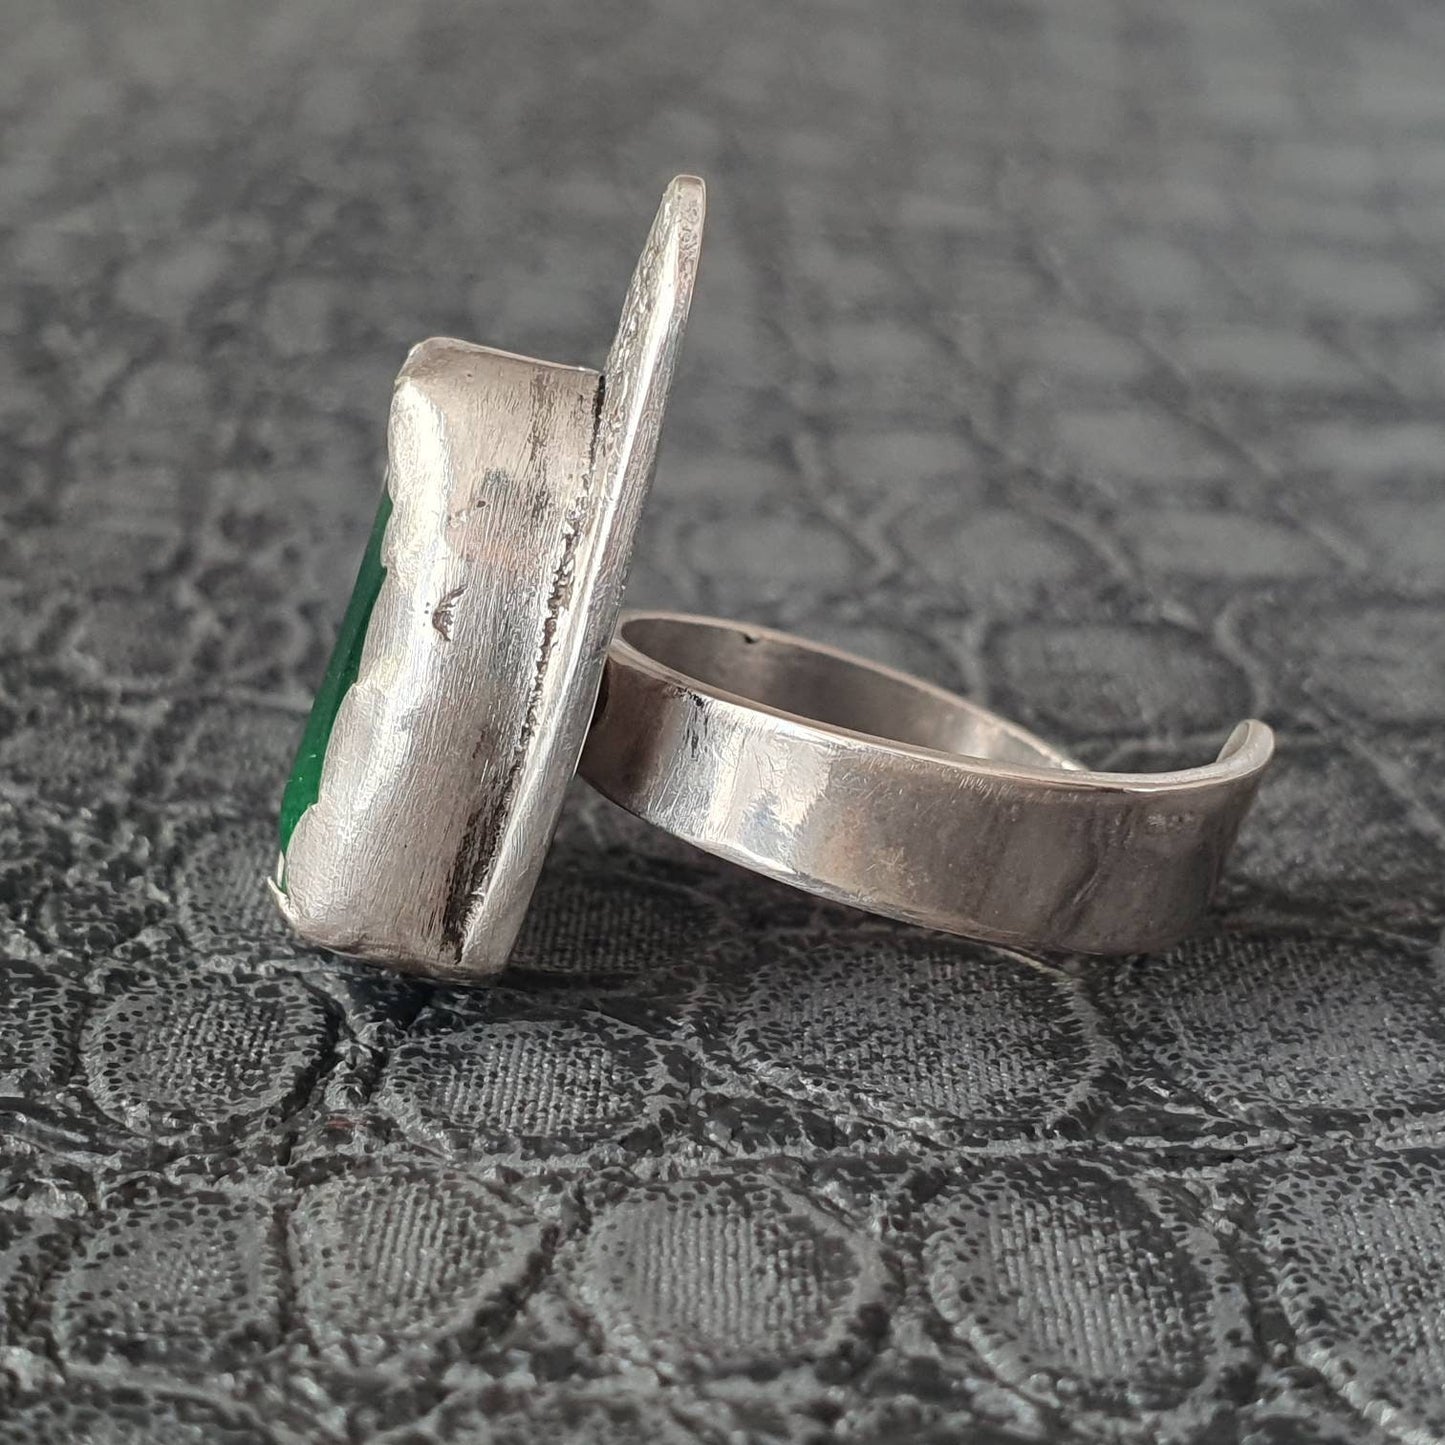 Silver ring, statement ring, sterling silver ring, green sea glass, recycled silver, upcycled jewelry, ethical, gifts, unique jewelry,